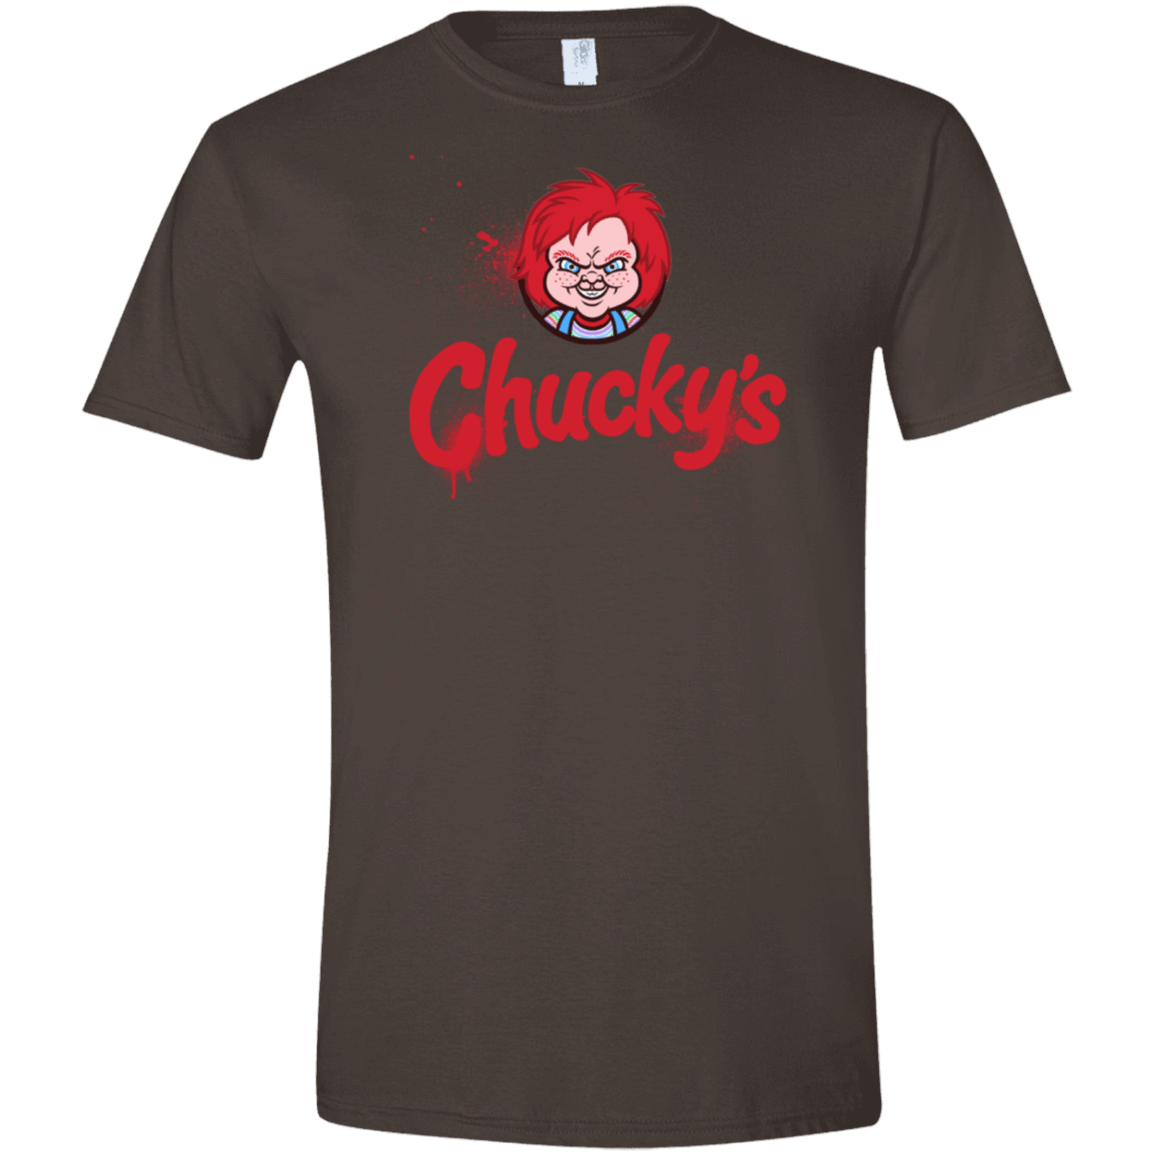 T-Shirts Dark Chocolate / S Chuckys Logo Men's Semi-Fitted Softstyle